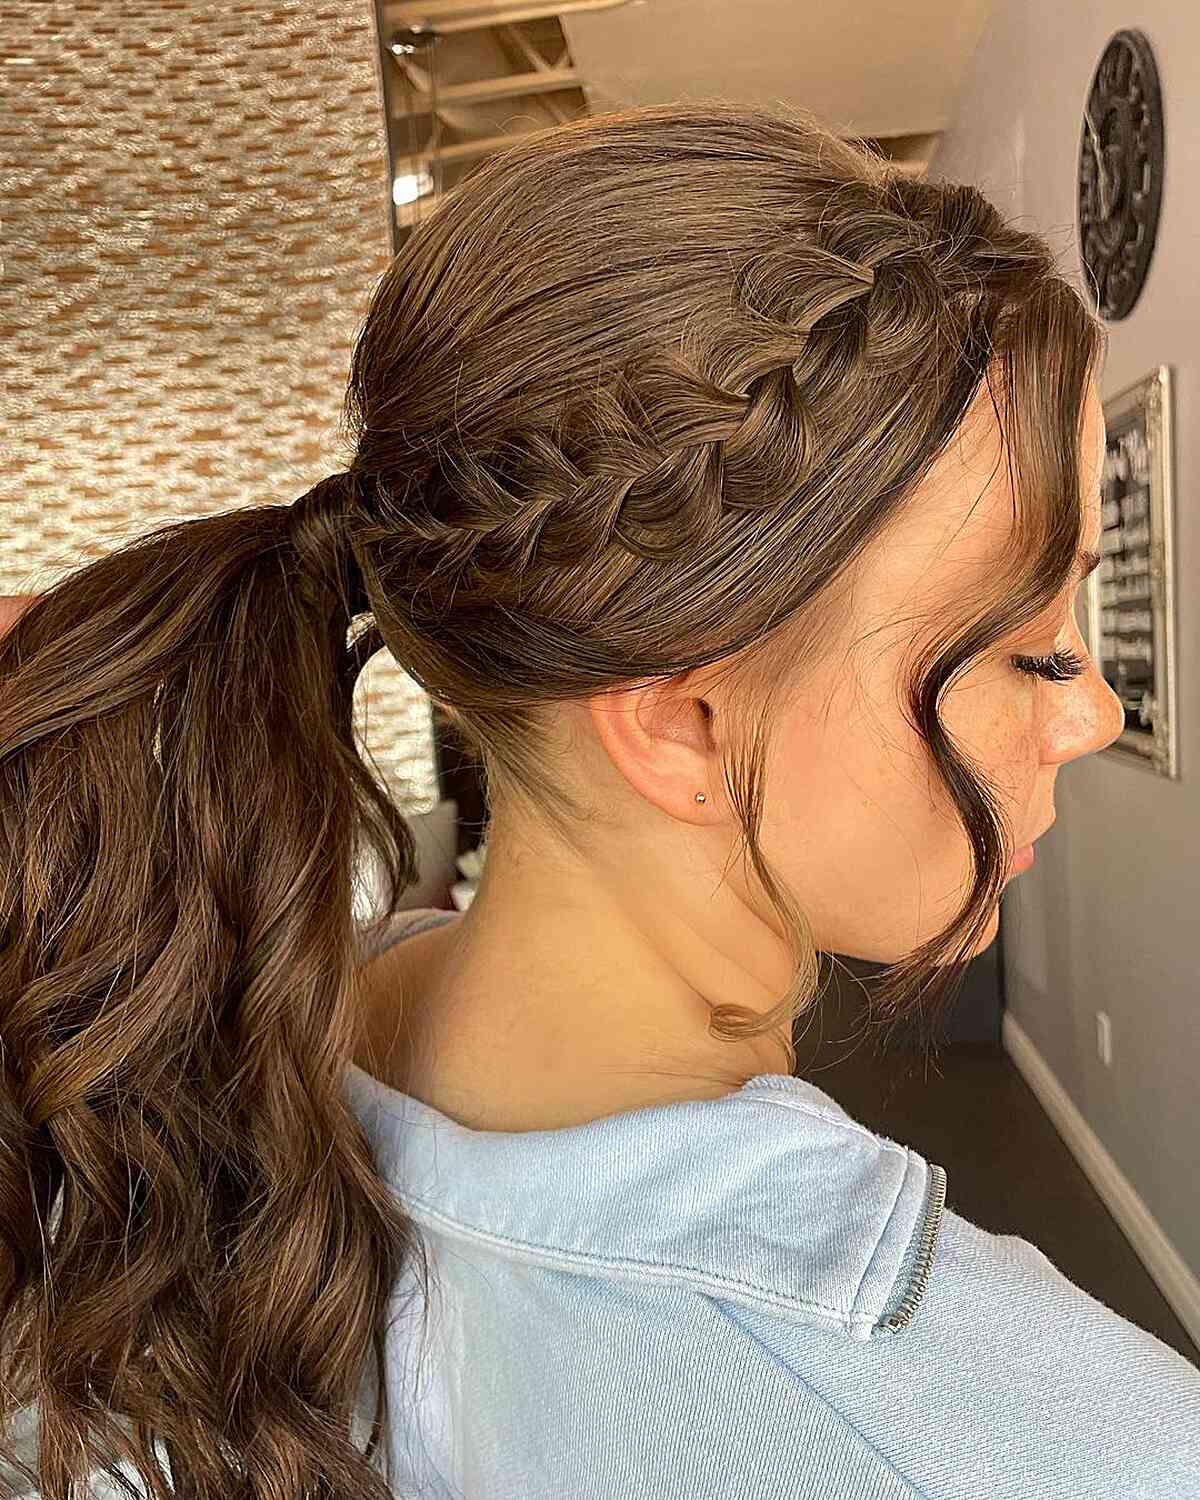 Graduation Wavy Low Pony Style with Side Braid for Long Hair